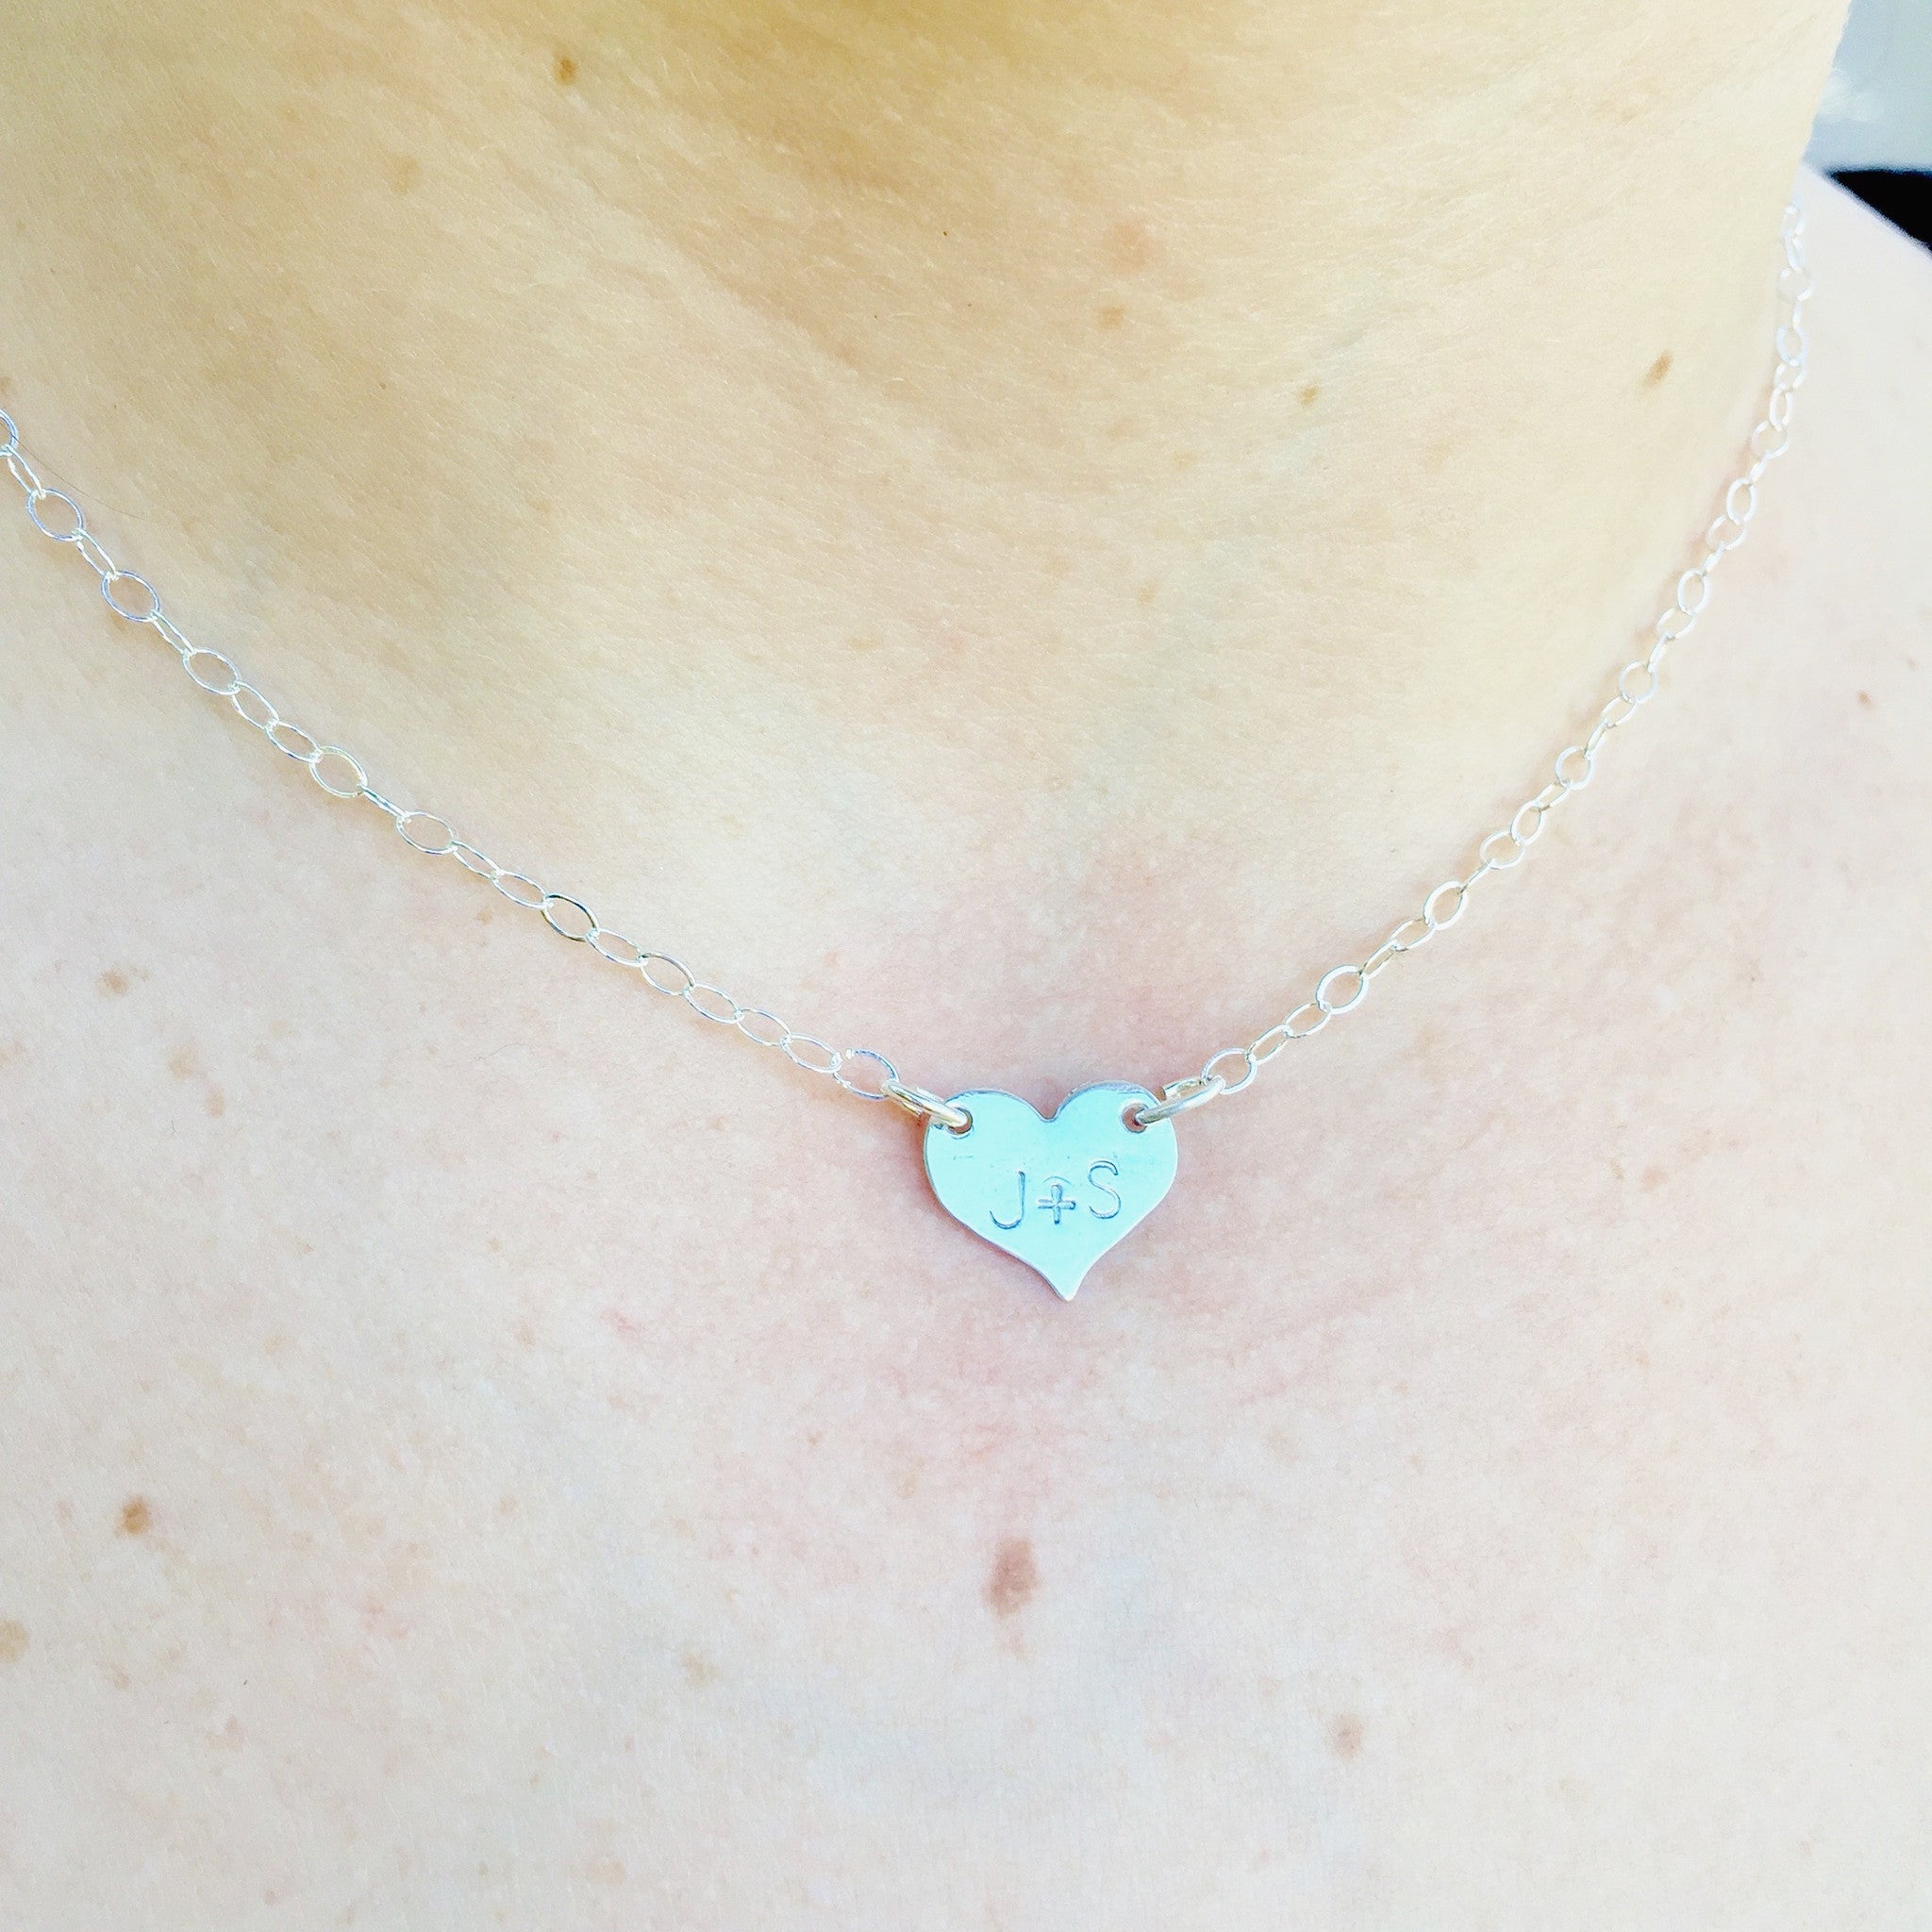 Minimal Necklace, Initial Necklace, Heart Necklace, Christmas Gifts For Her